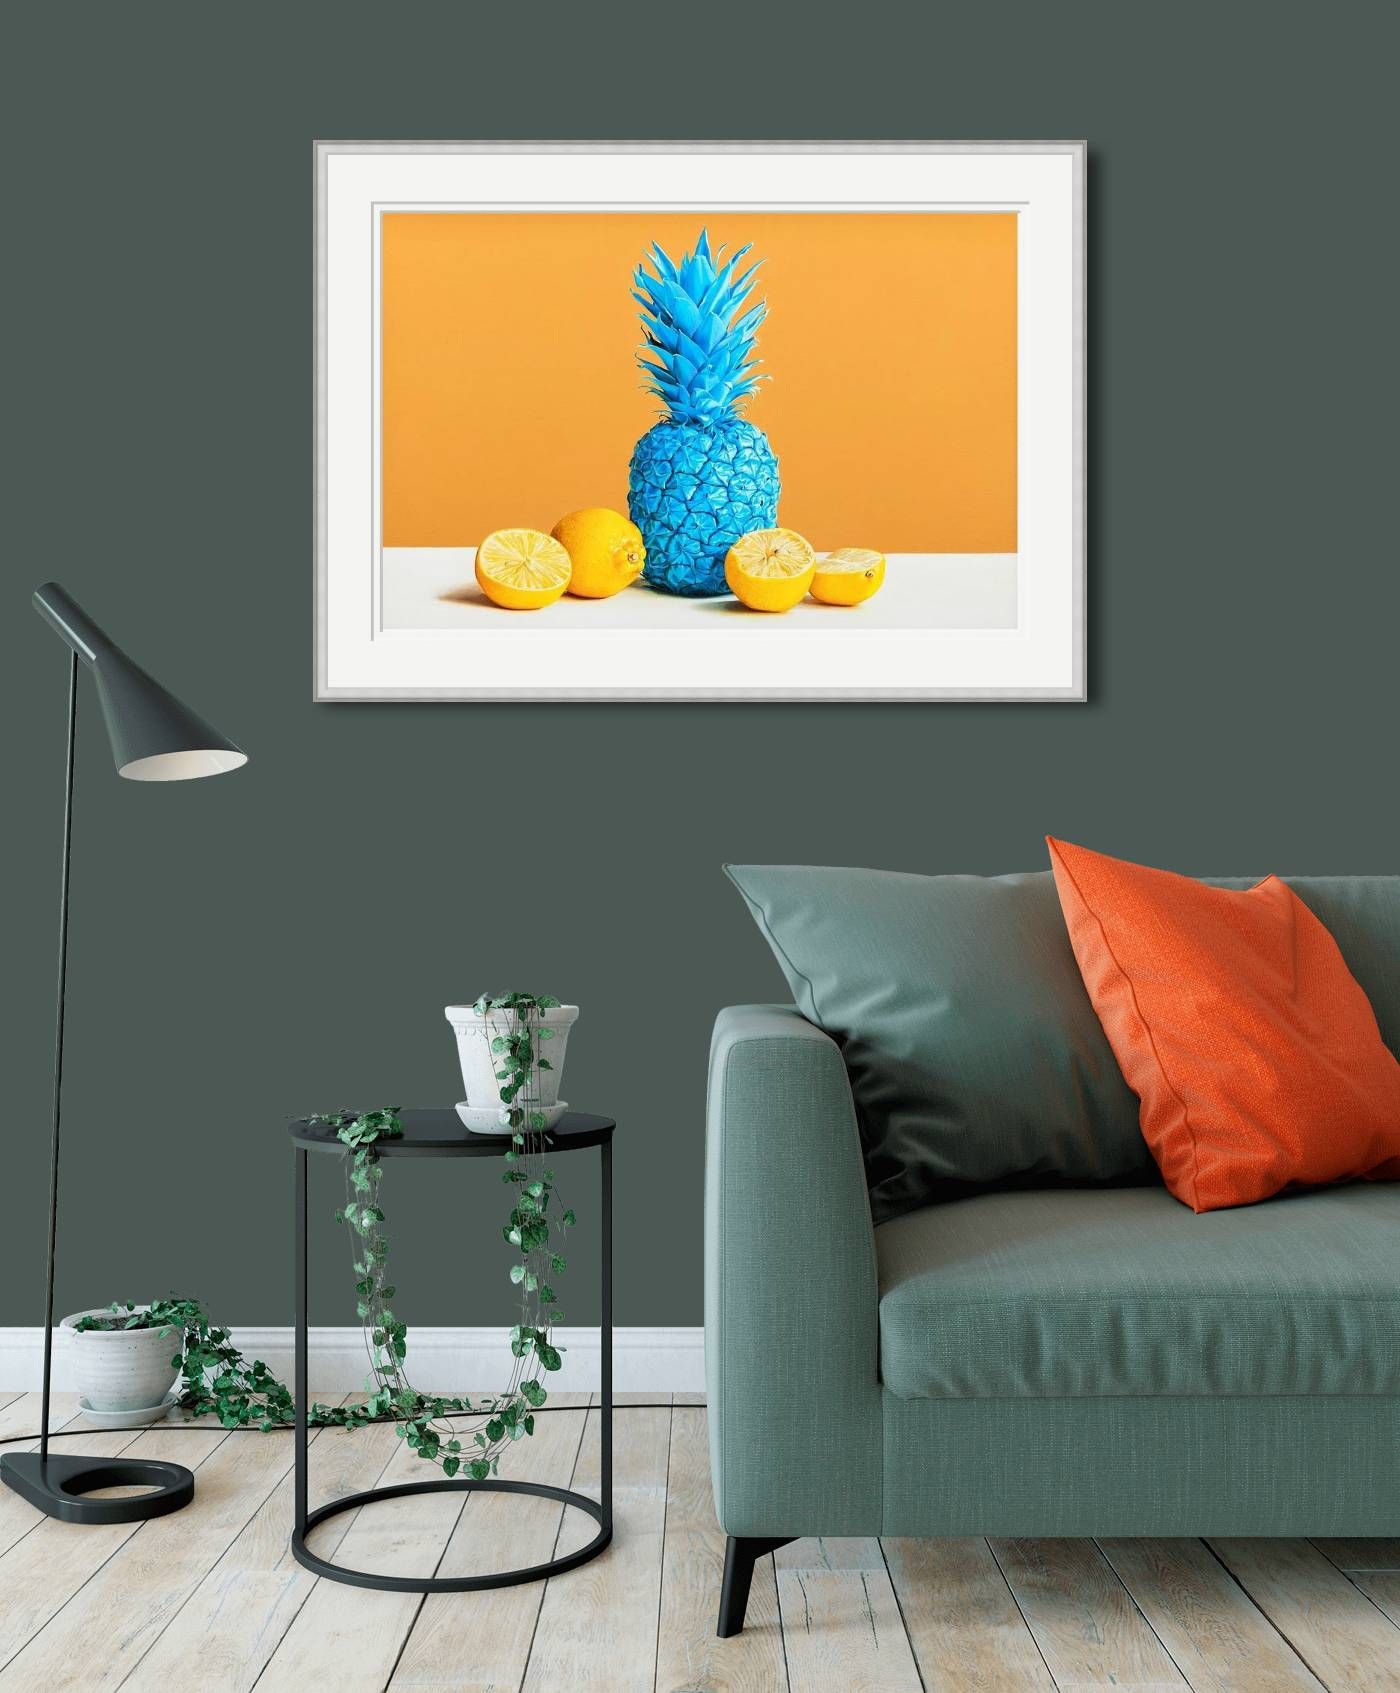 Small  - Blue Pineapple by Stephen Johntson